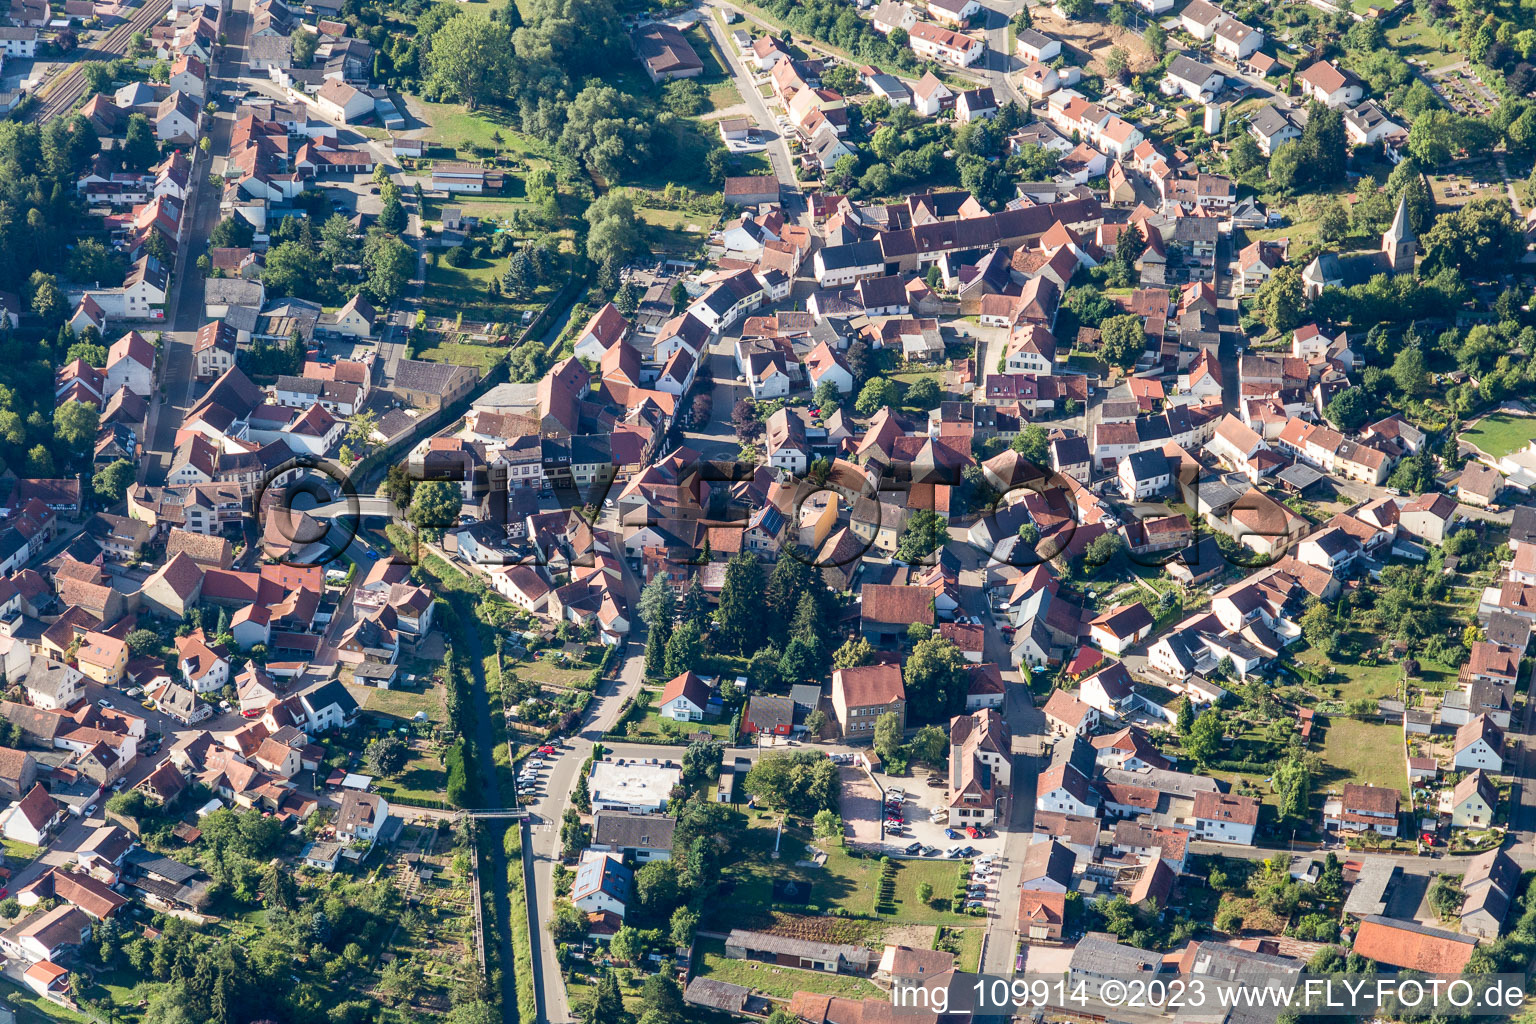 Aerial view of Alsenz in the state Rhineland-Palatinate, Germany